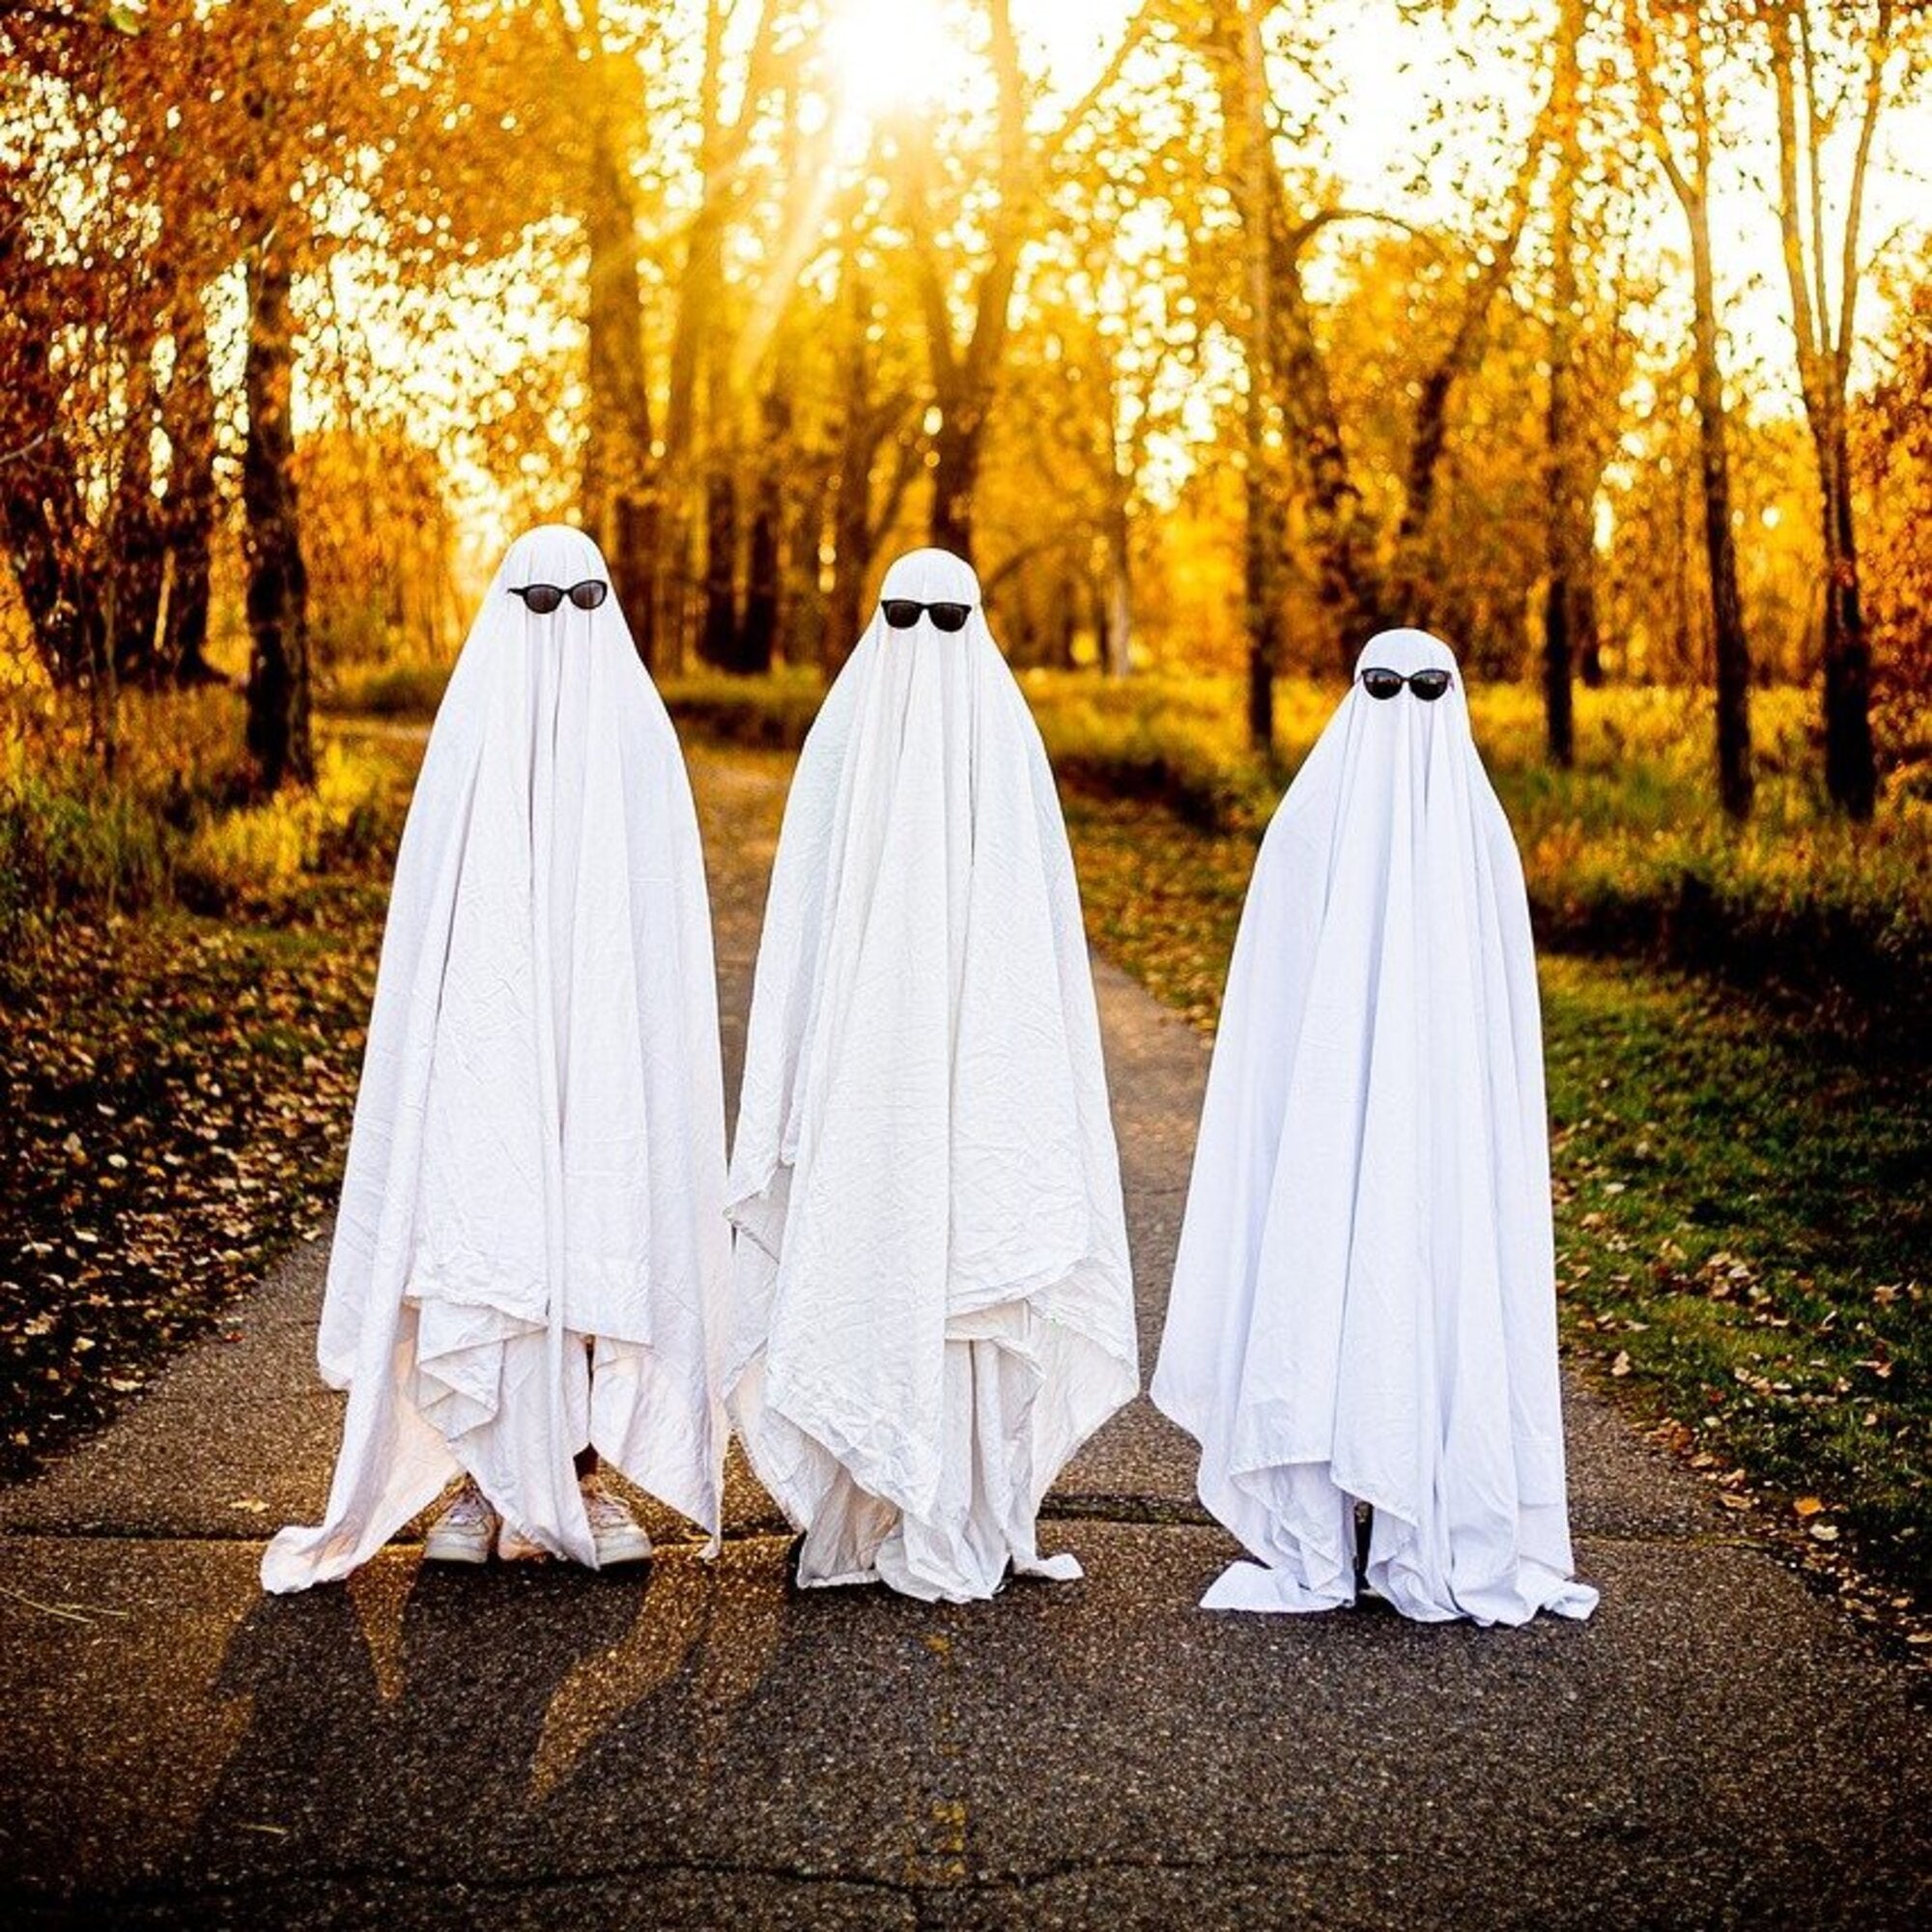 What to Wear for Halloween: 41 Halloween Costume Ideas for a Family of 3